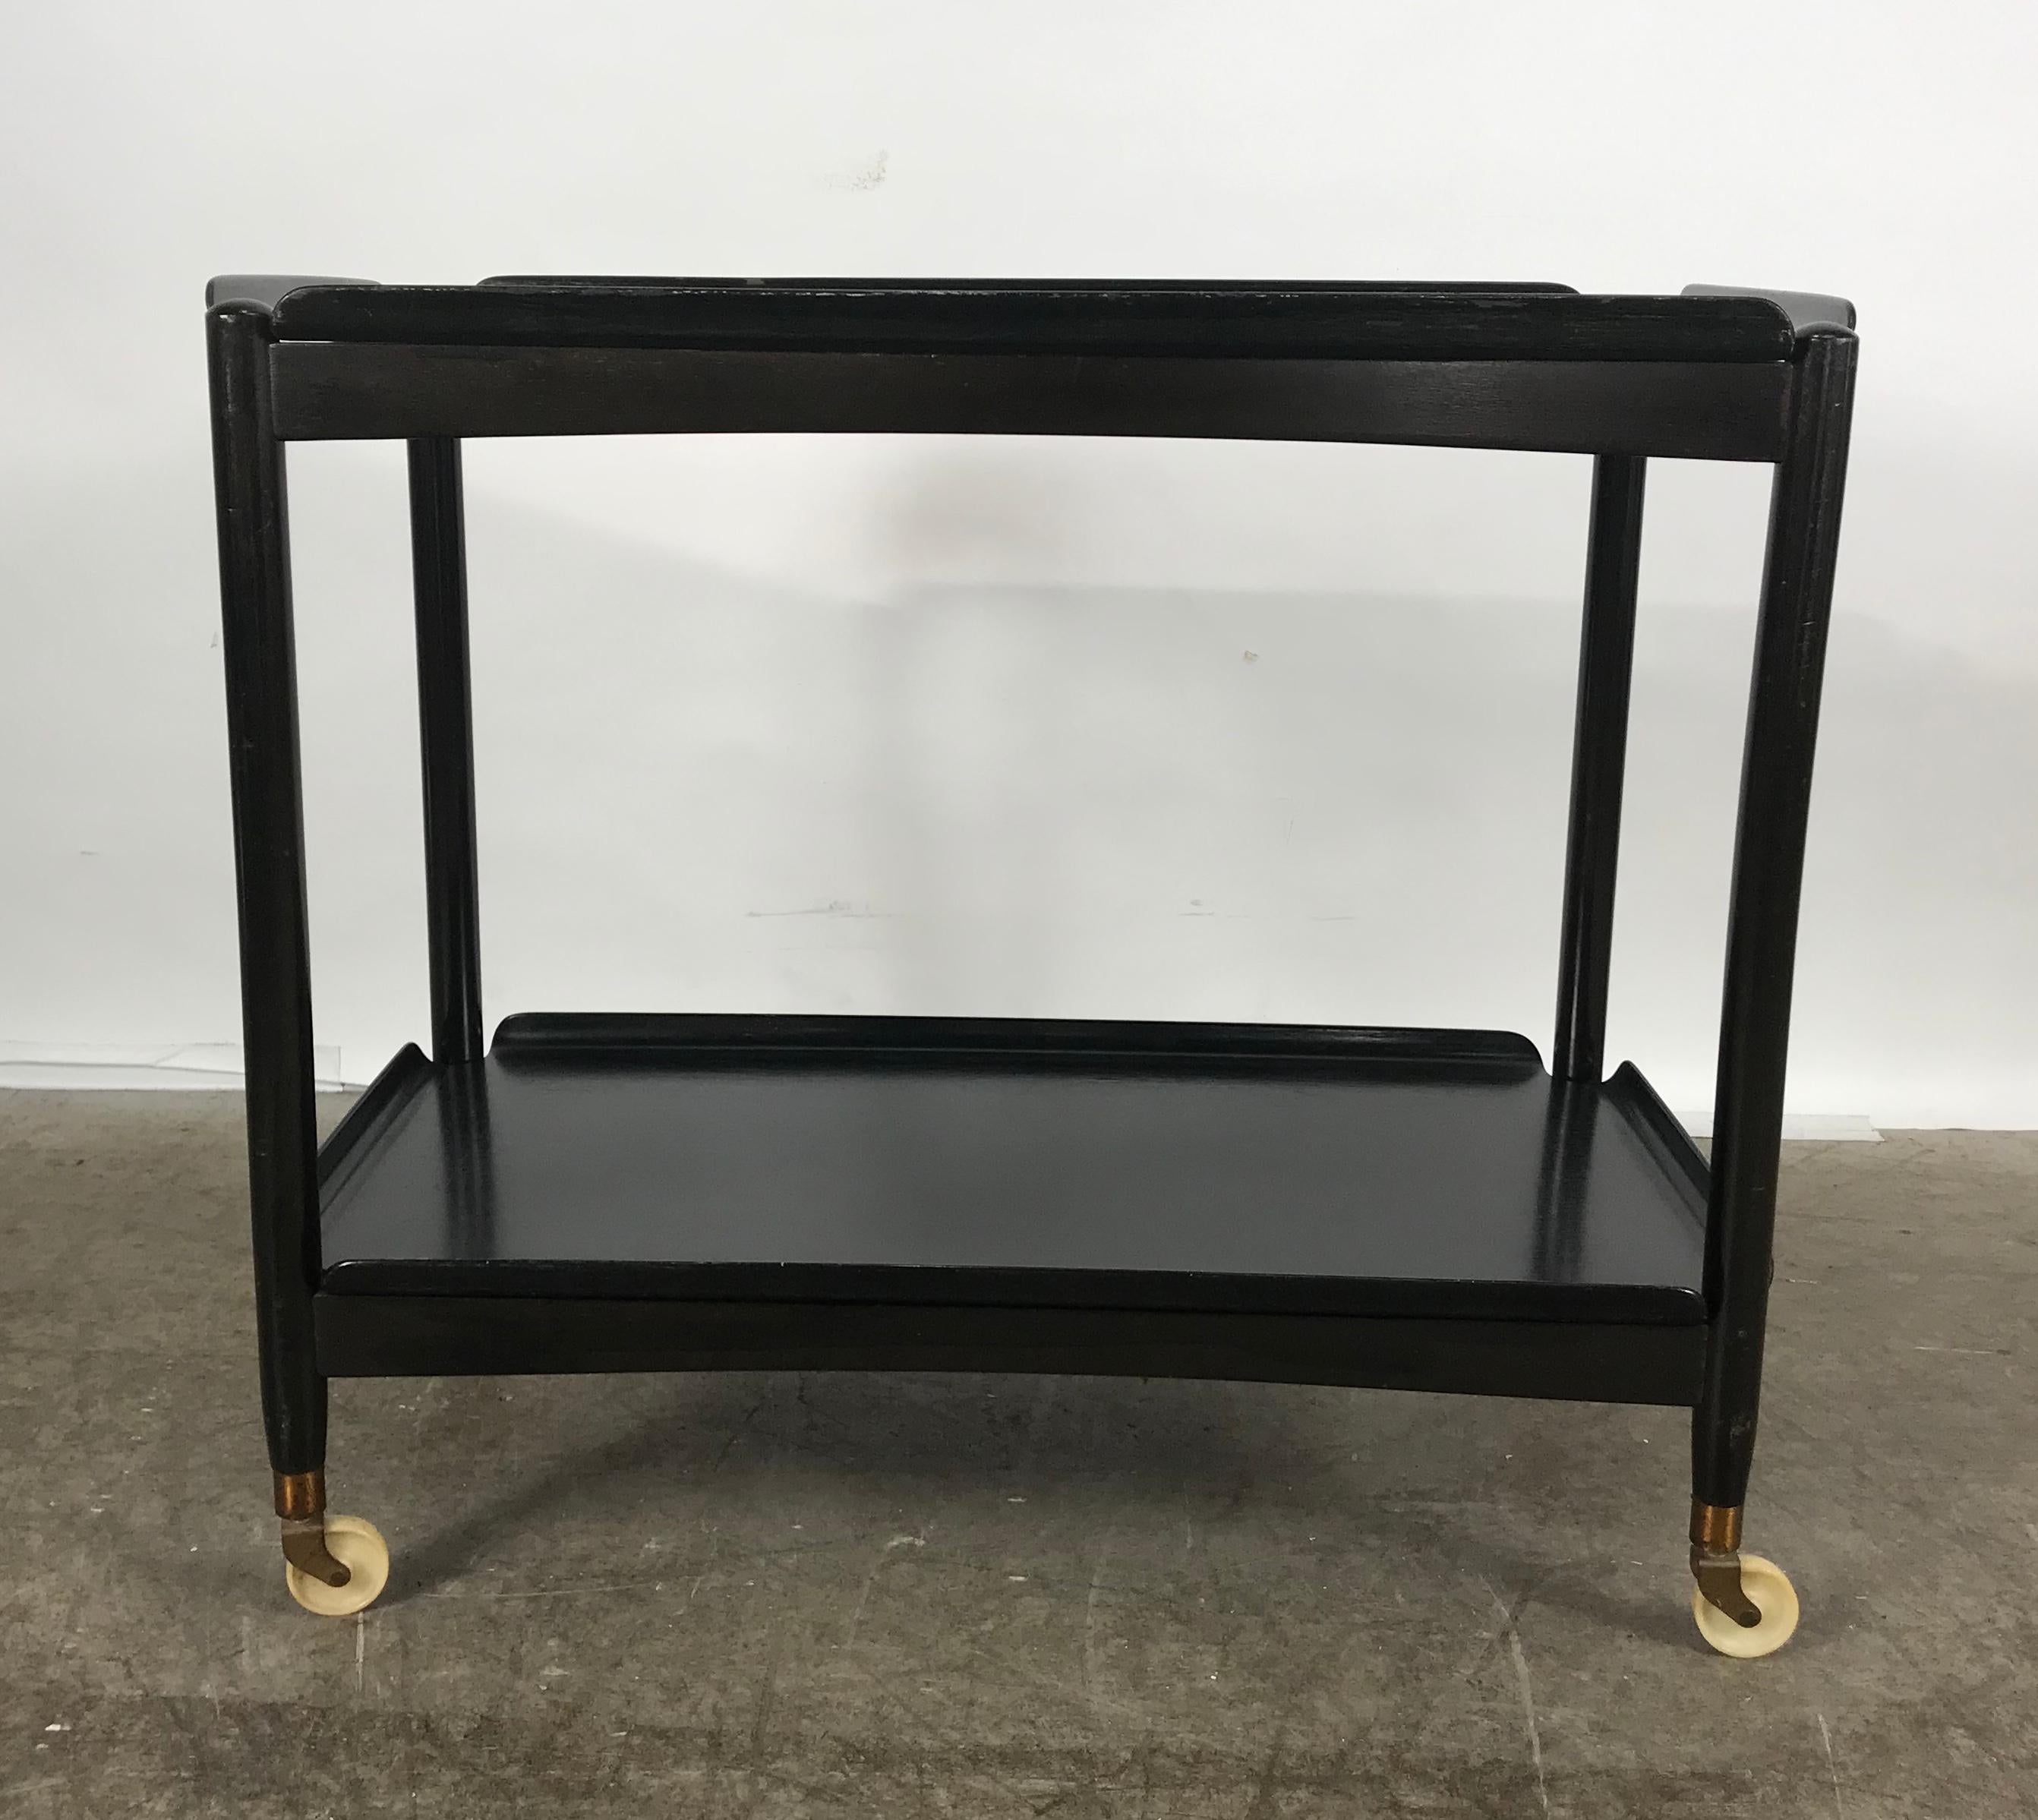 Classic Danish modernist two-tier collapsible rolling tray table / serving cart, retains original black lacquer finish, bentwood removable trays, stamped made in Denmark. Stunning.